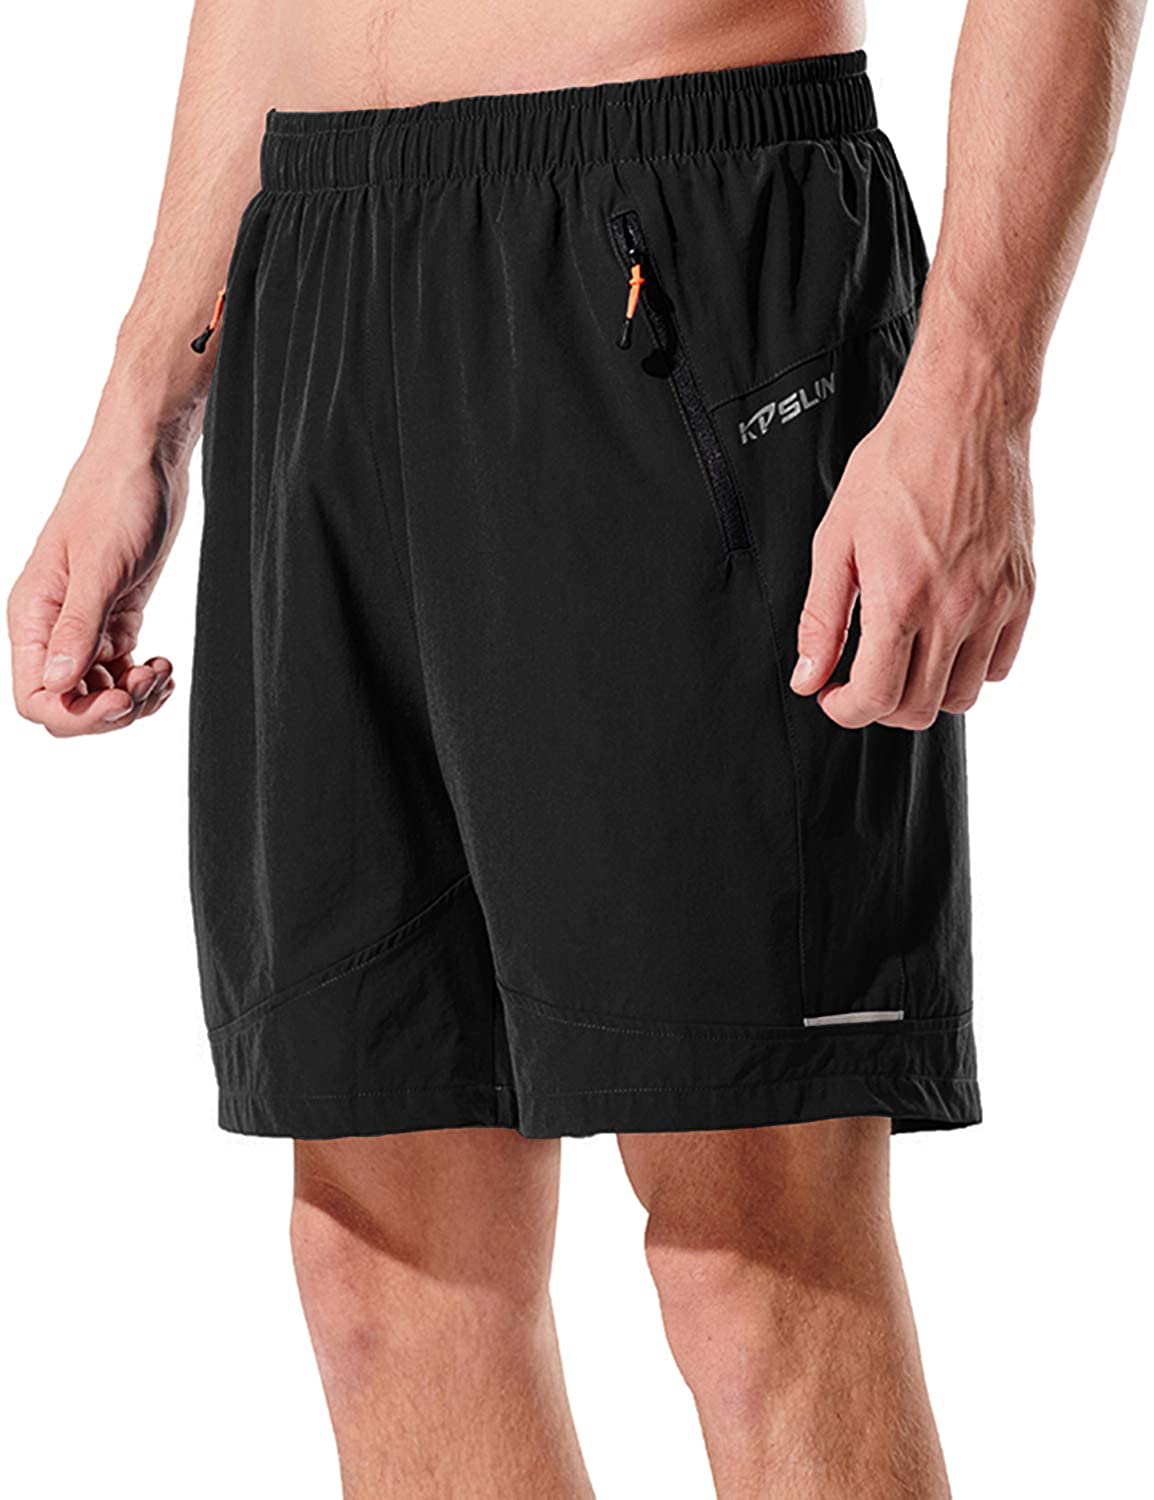 KPSUN Mens Workout Running Shorts Quick Dry Athletic Shorts with Liner Zipper Pockets